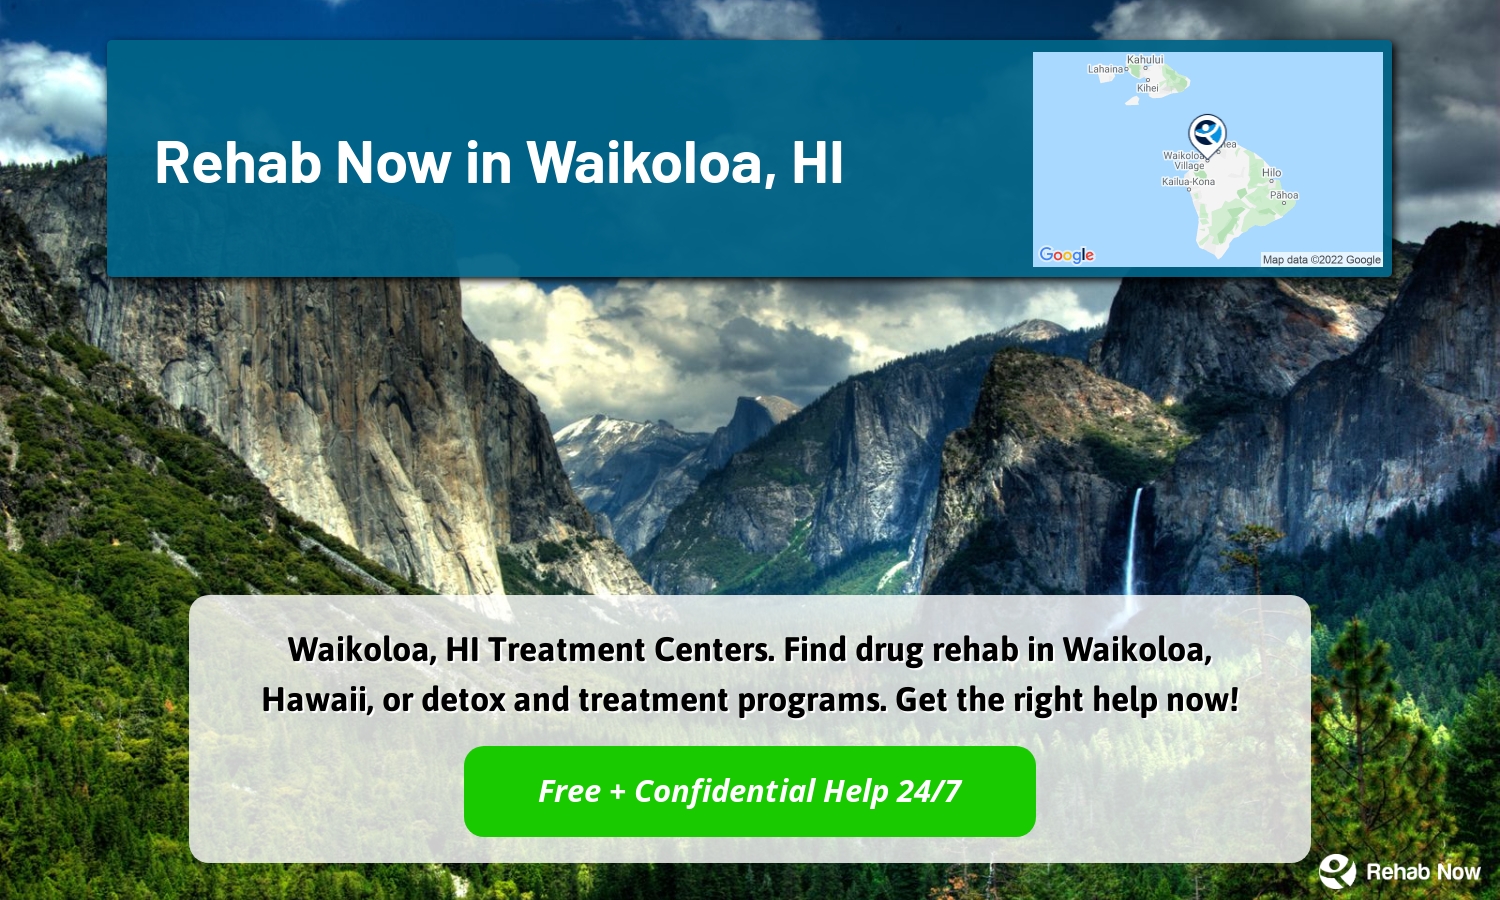 Waikoloa, HI Treatment Centers. Find drug rehab in Waikoloa, Hawaii, or detox and treatment programs. Get the right help now!